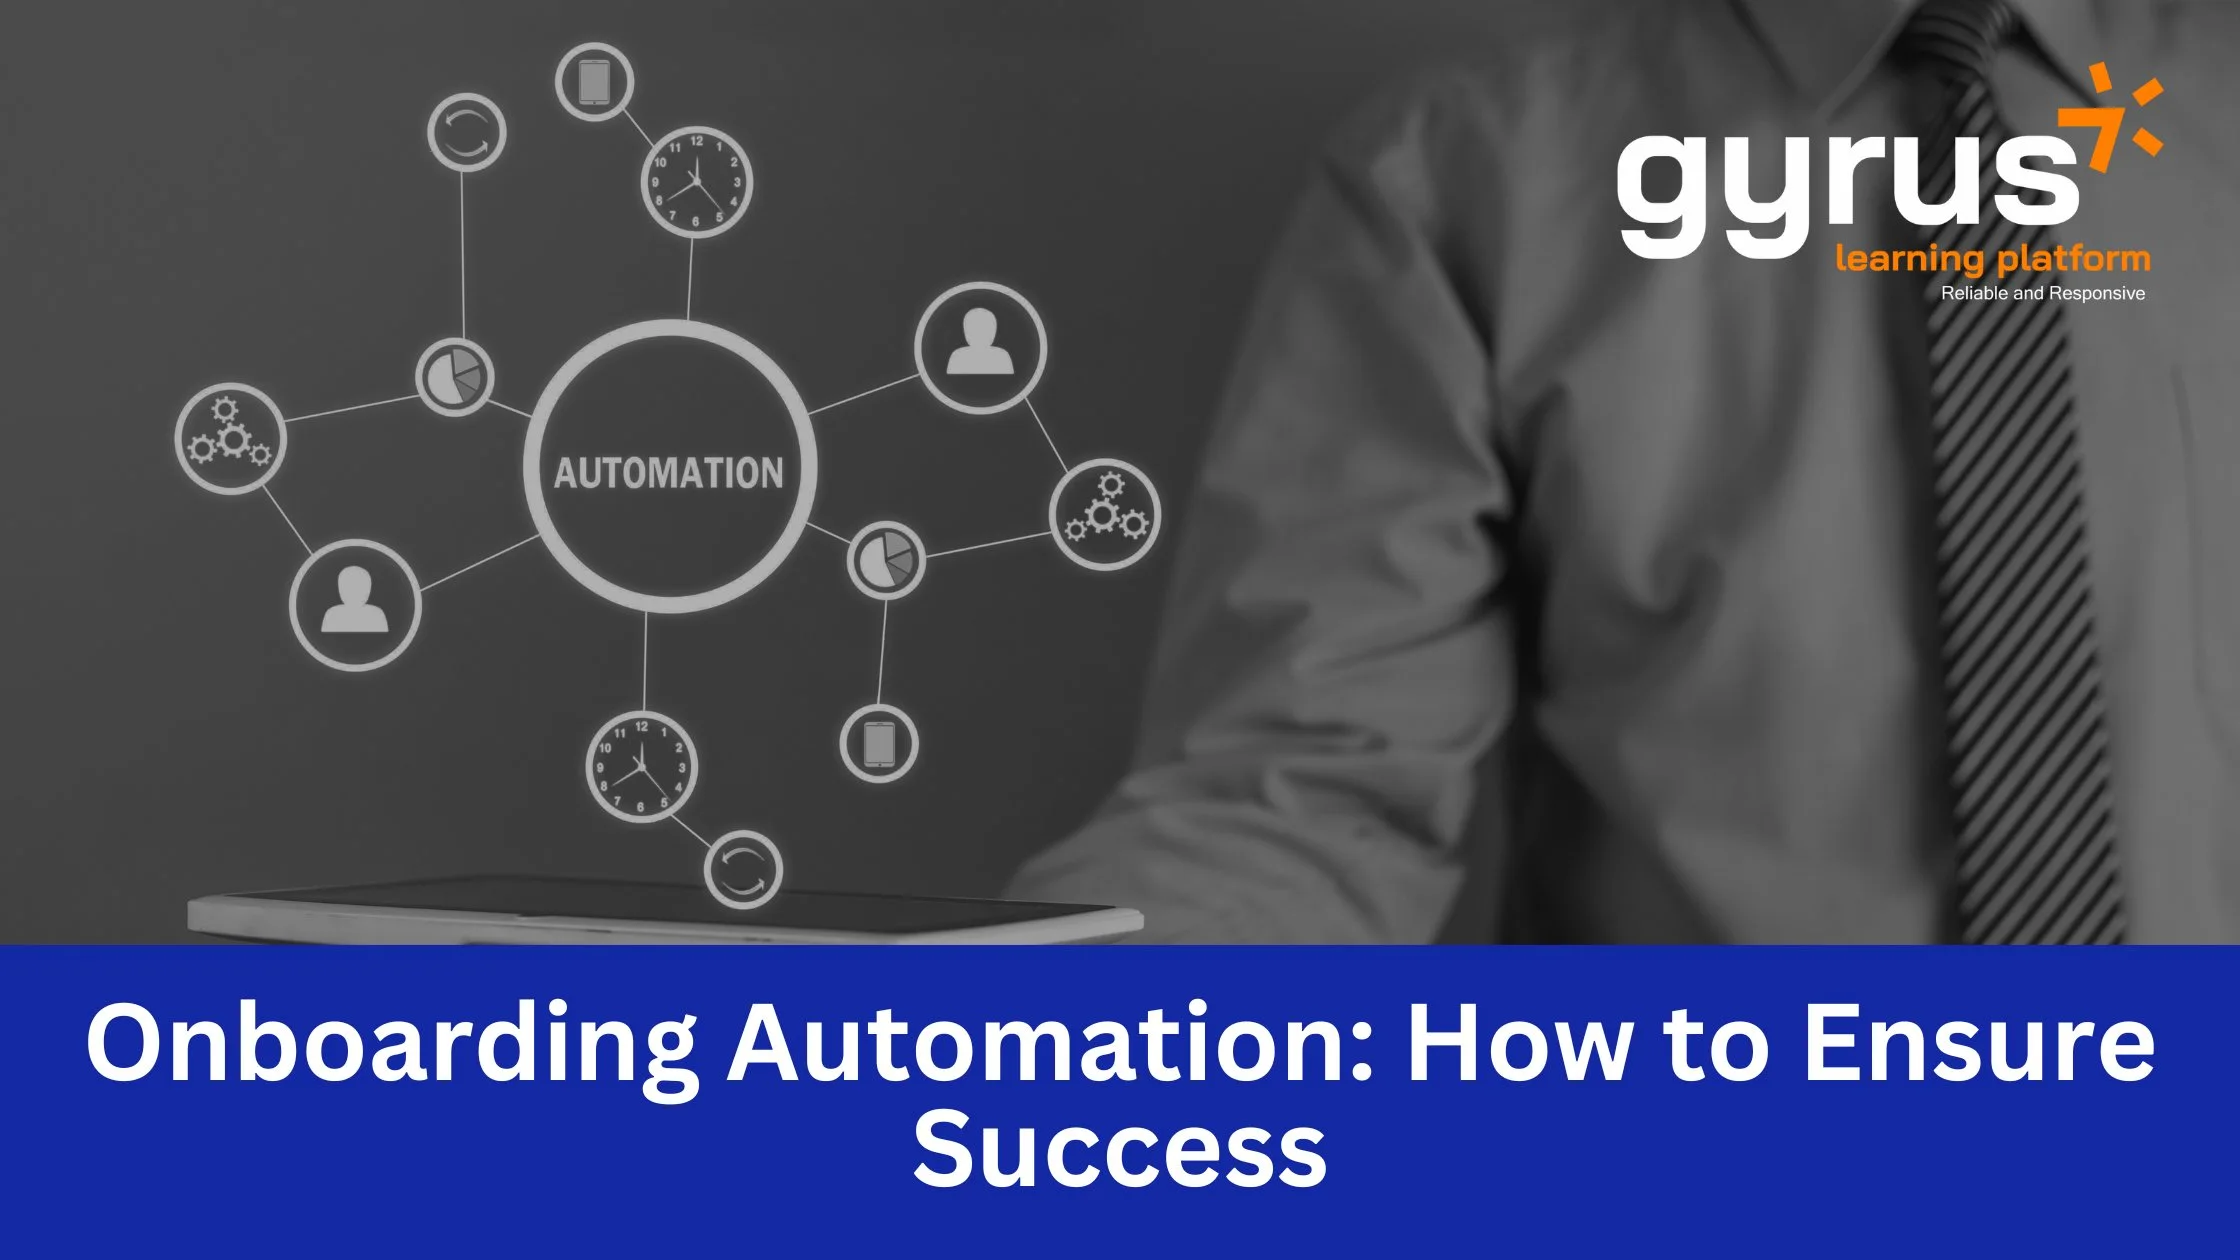 Onboarding Automation: How to Ensure Success